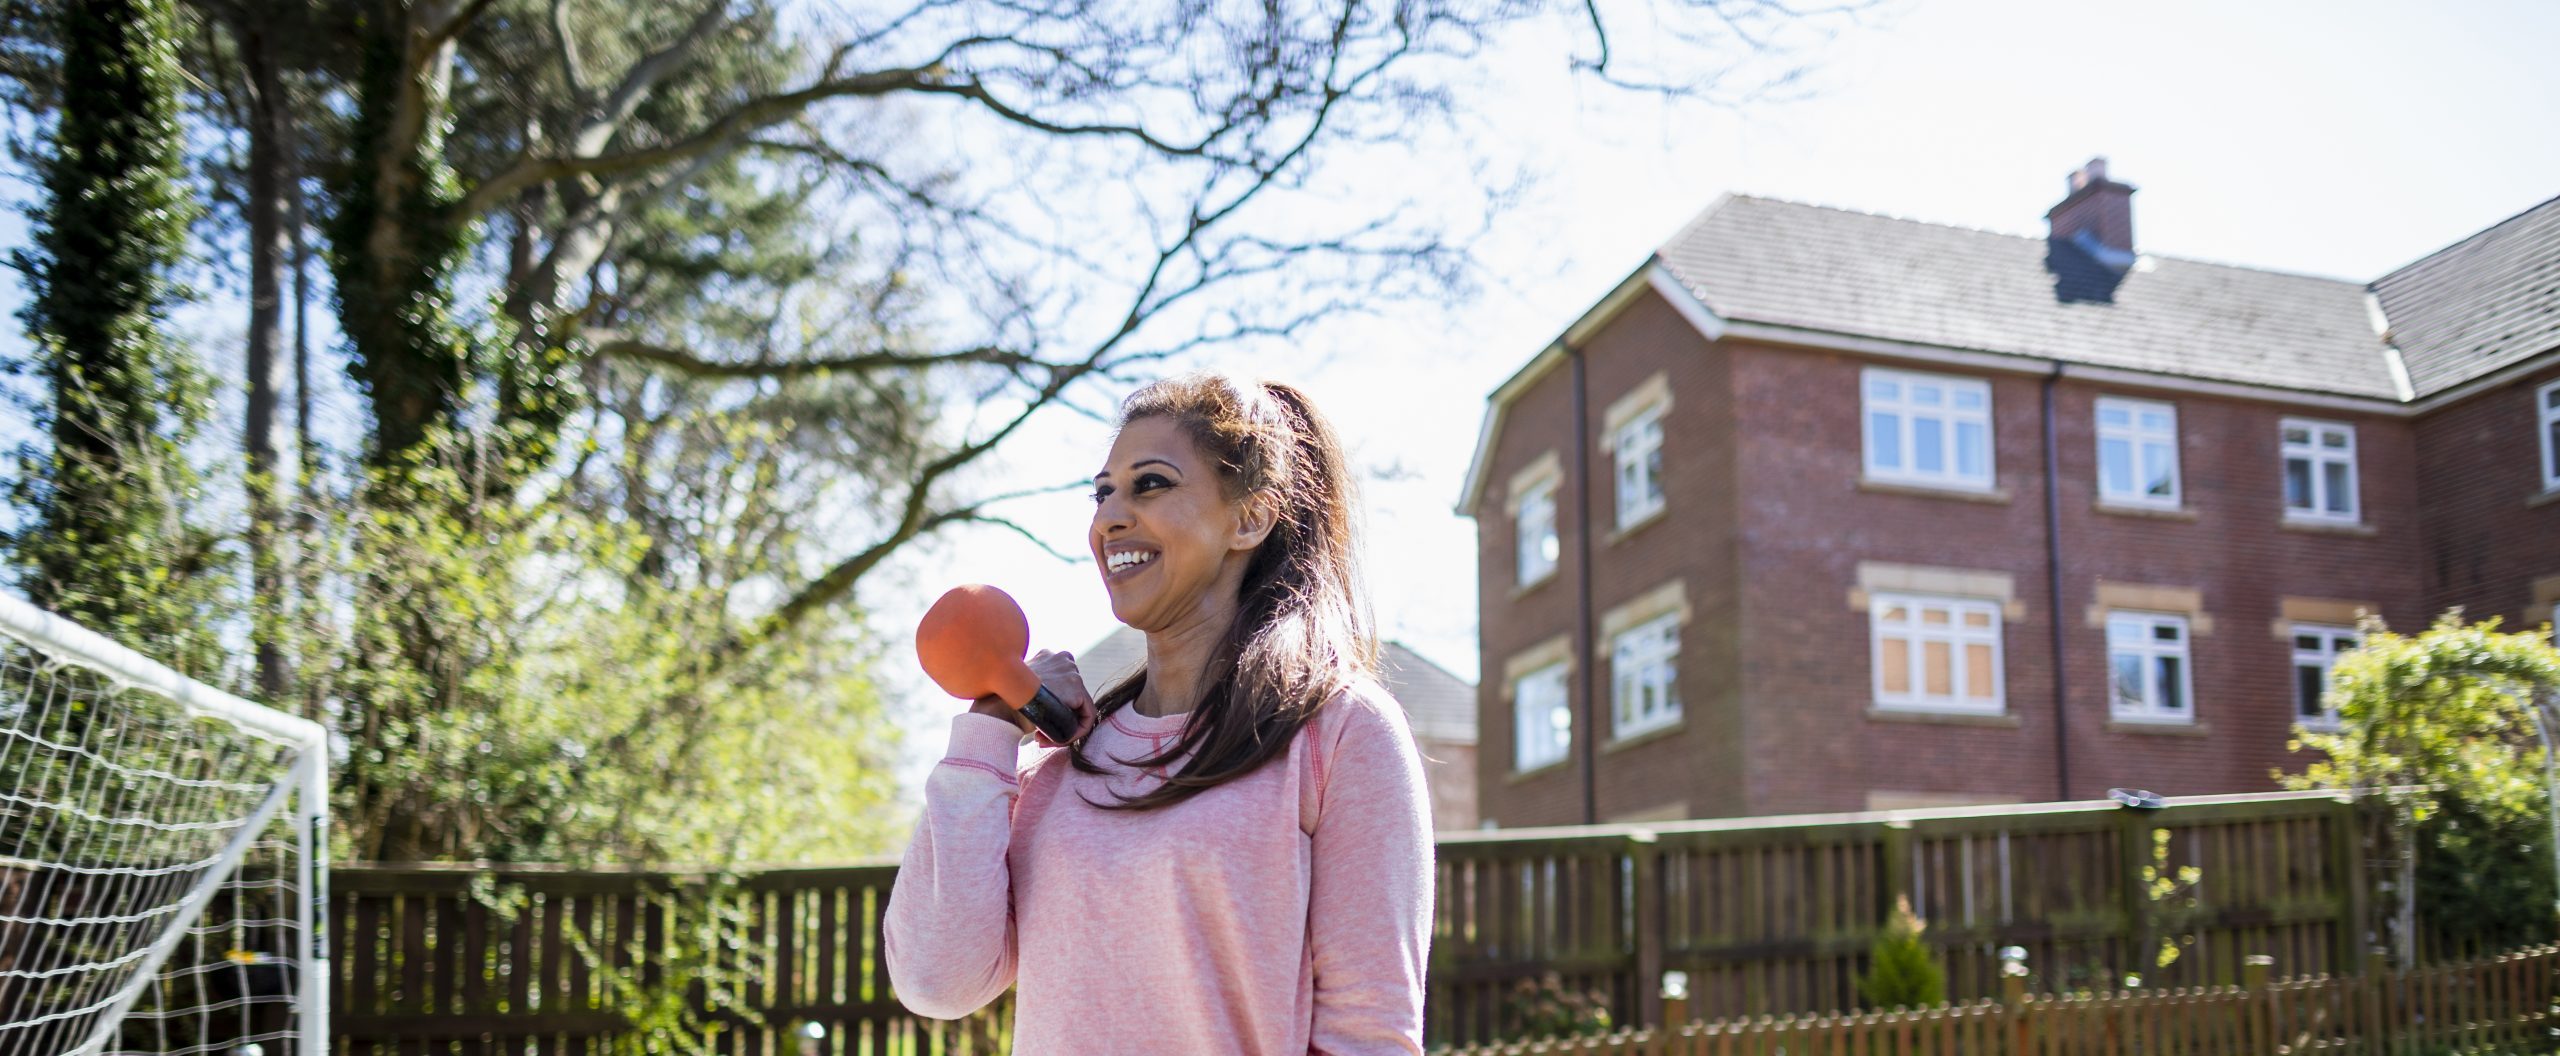 Shazia, a south Asian woman aged 45-55 lifting weights in her garden